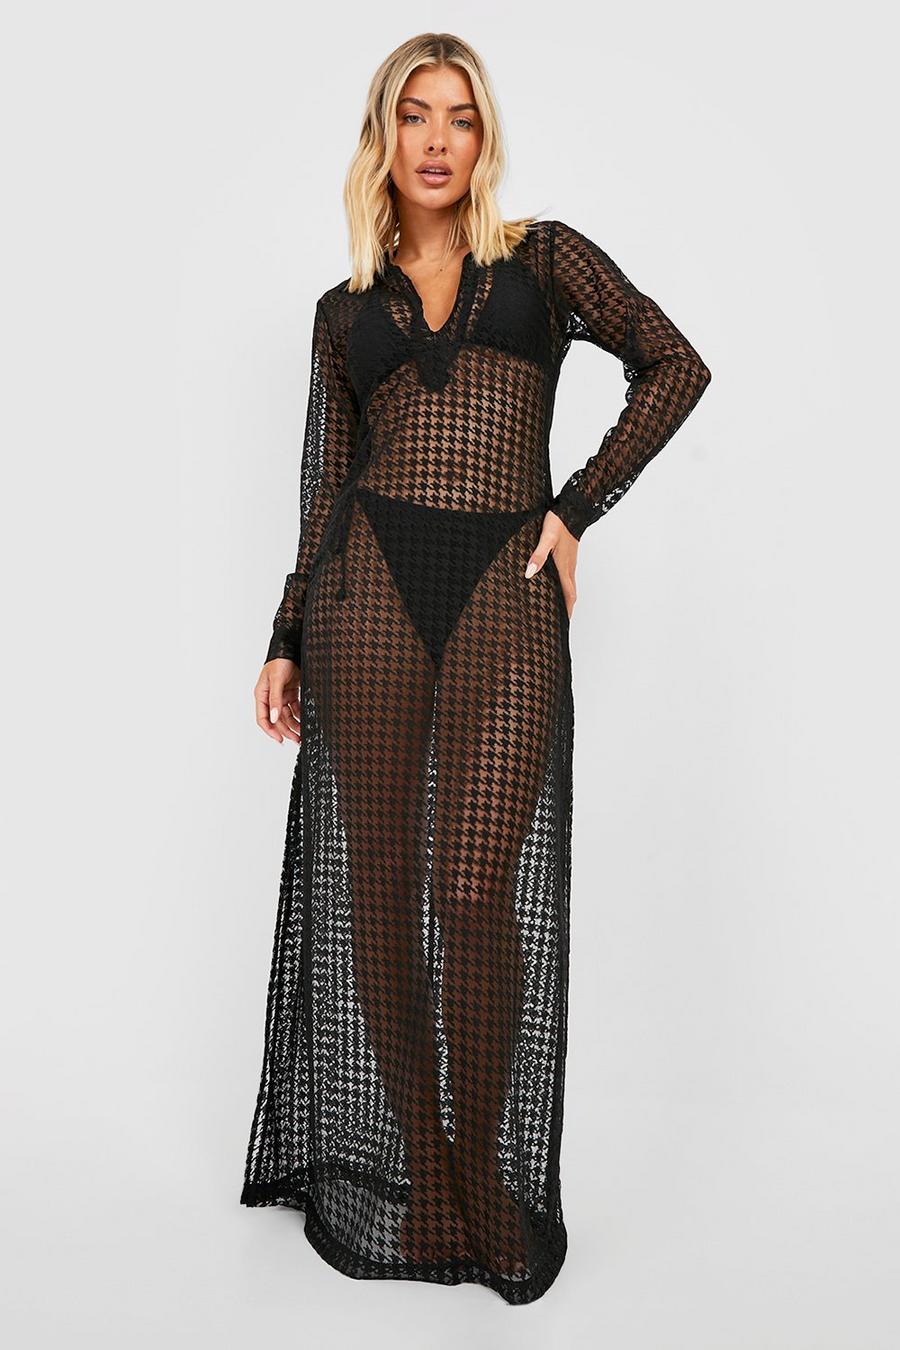 Black Dogtooth Lace Beach Cover-up Maxi Dress image number 1